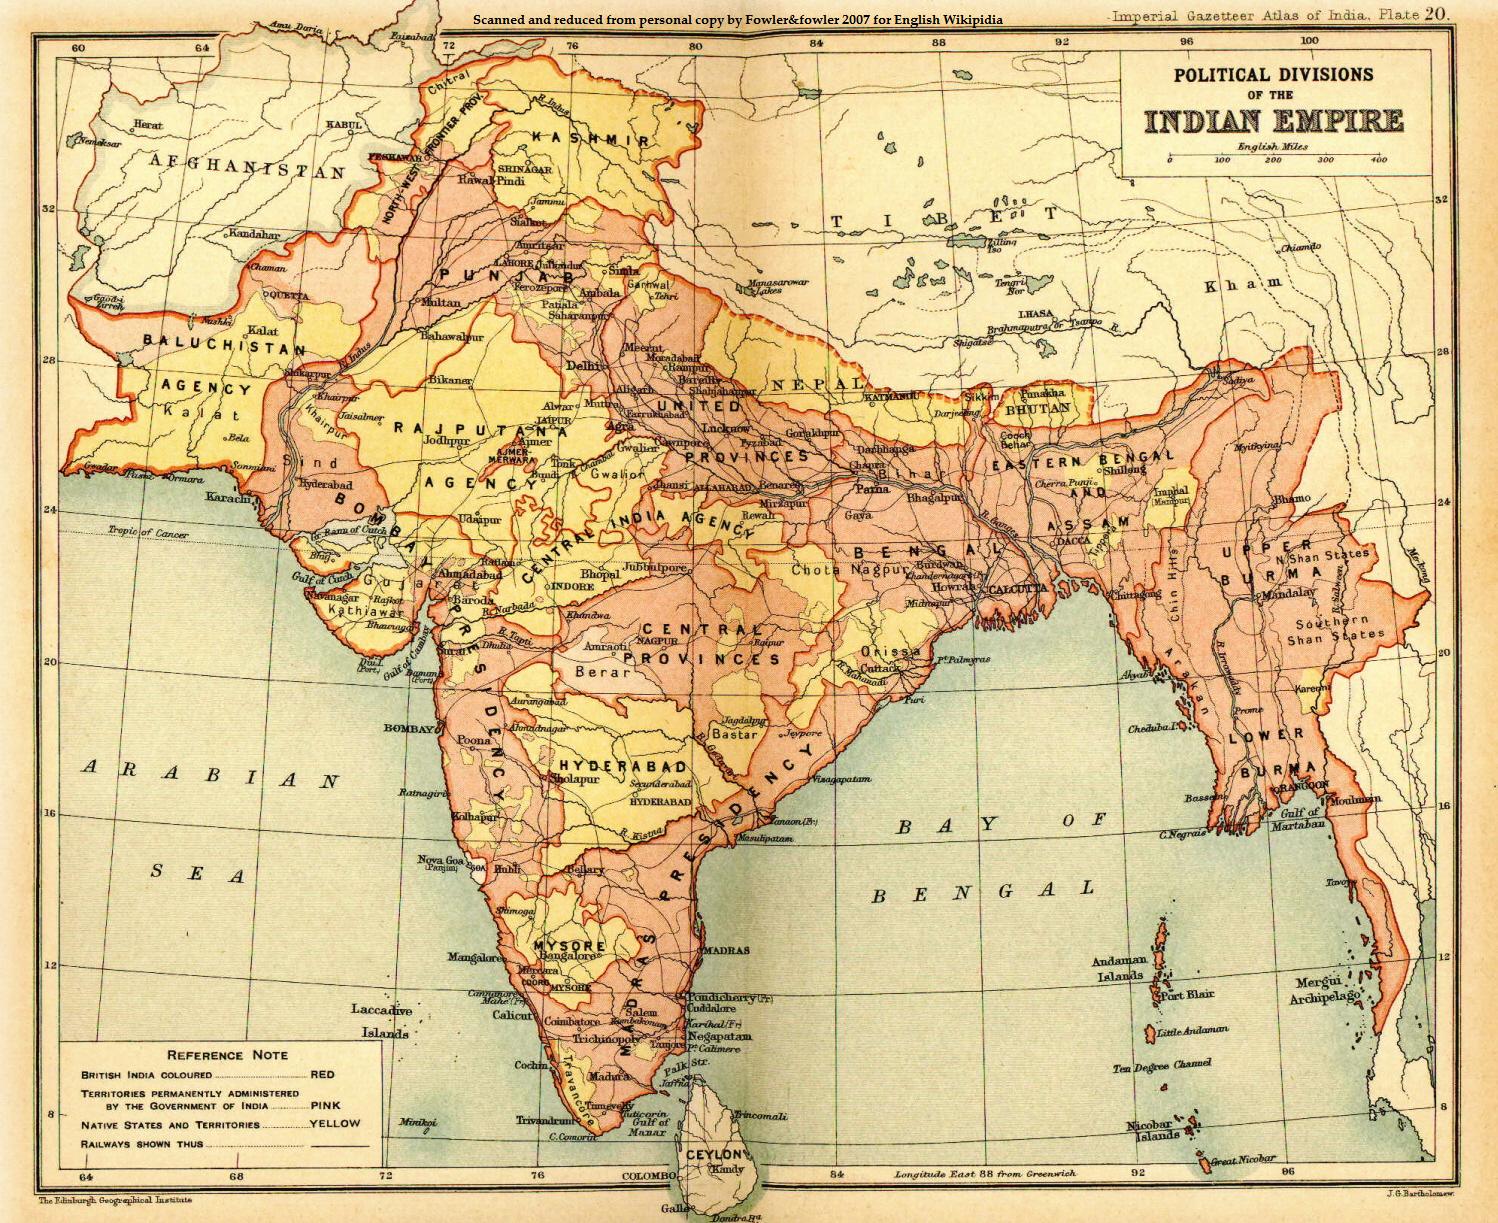 political+divisions+of+British+Indian+Empire+1909+Imperial+Gazetteer+of+India.jpg